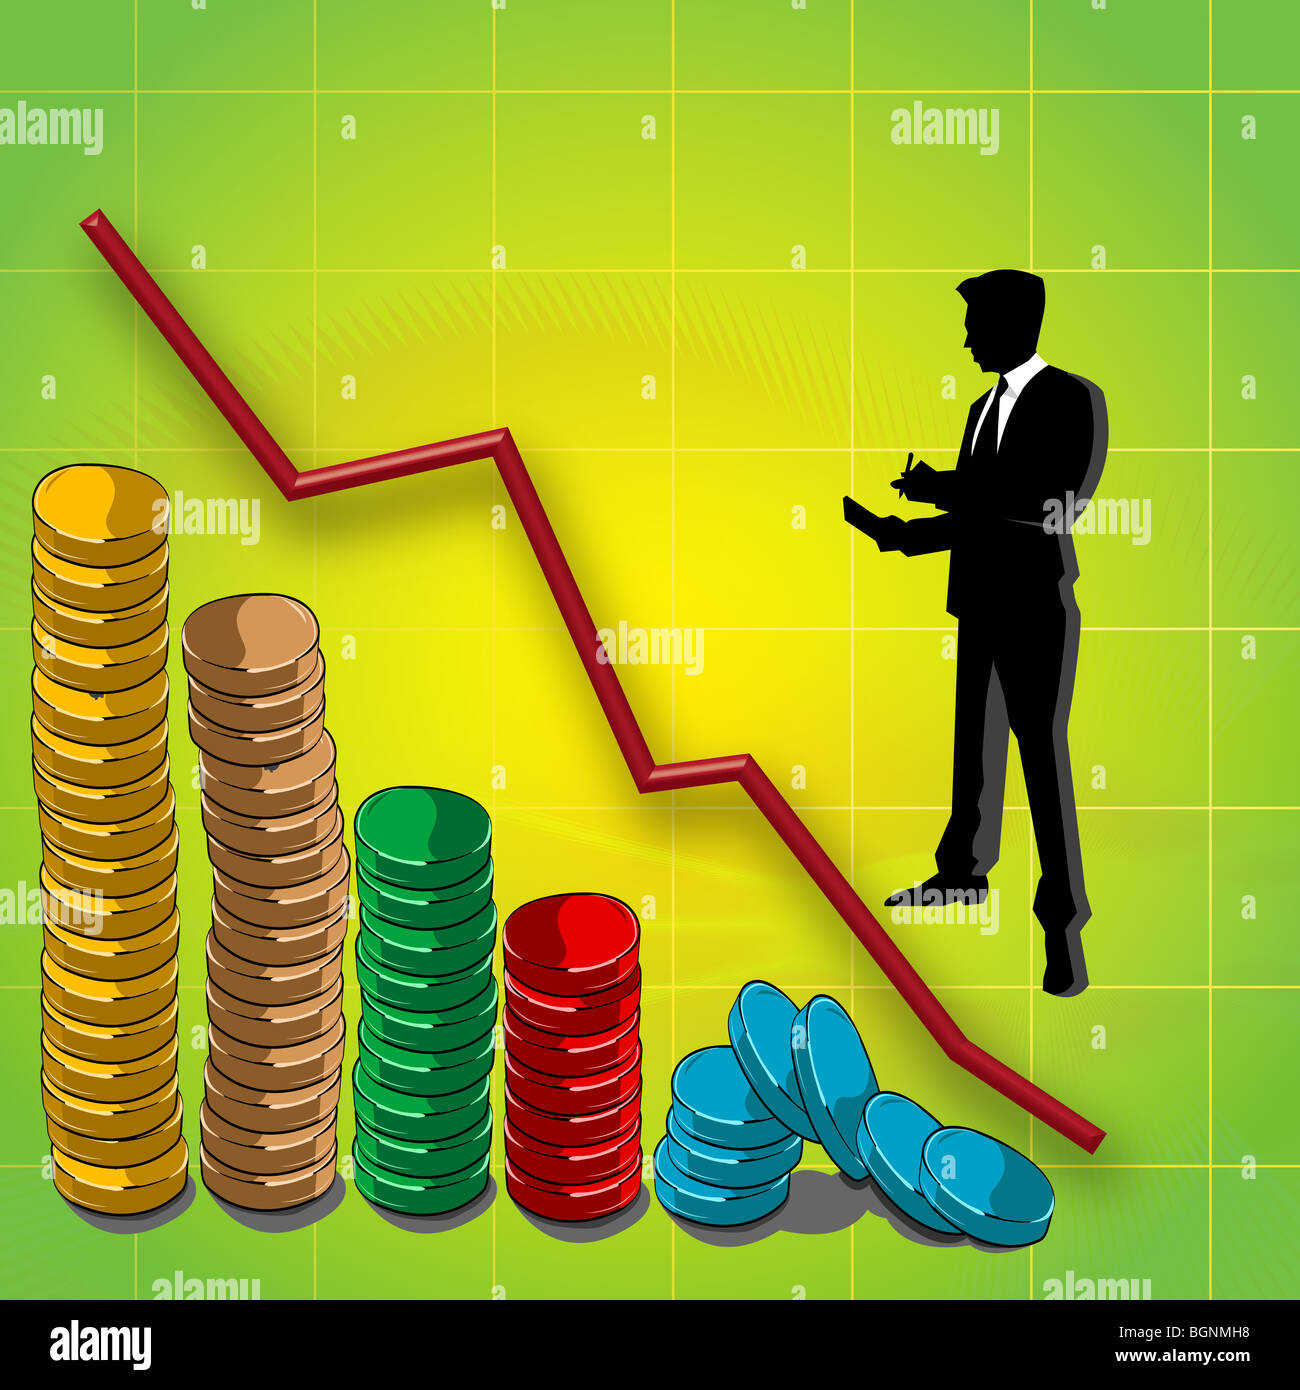 graphline and bar graph of coins, business man silhouette Stock Photo